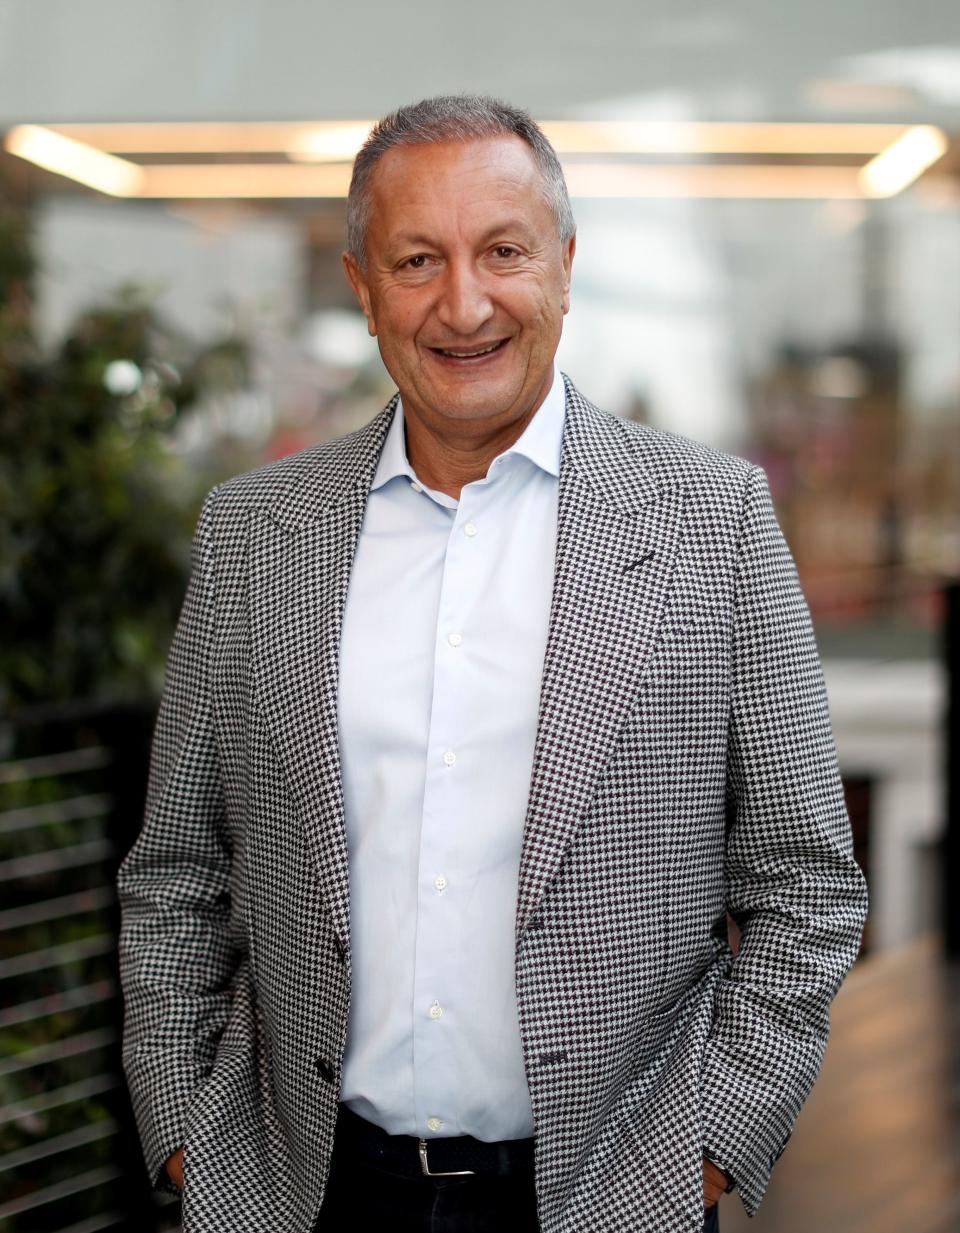 Isaac Larian, CEO of MGA Entertainment, poses for a portrait at the Company's headquarters in Chatsworth, California, U.S., September 17, 2021.  Picture taken September 17, 2021. REUTERS/Mario Anzuoni - RC2VRP9QG7Y3